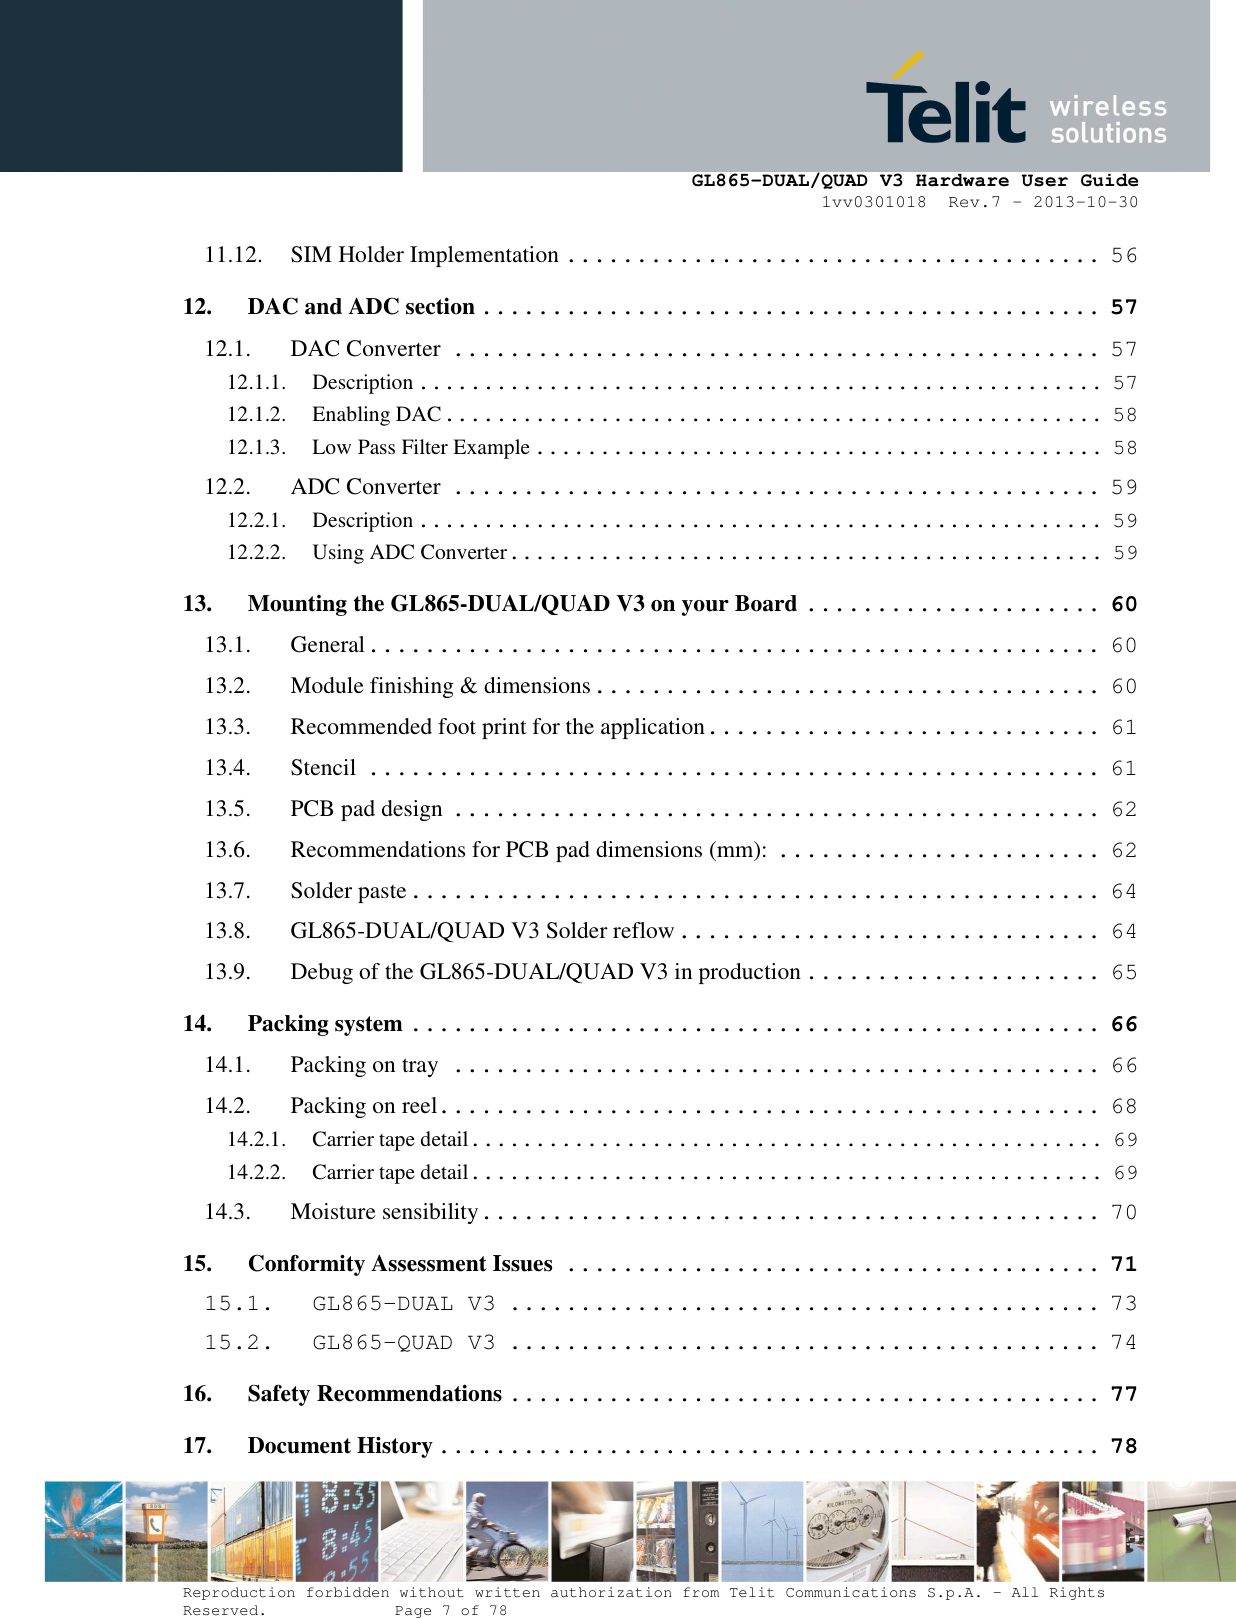      GL865-DUAL/QUAD V3 Hardware User Guide 1vv0301018  Rev.7 – 2013-10-30  Reproduction forbidden without written authorization from Telit Communications S.p.A. - All Rights Reserved.    Page 7 of 78 Mod. 0805 2011-07 Rev.2 11.12. SIM Holder Implementation ...................................... 56 12. DAC and ADC section ............................................ 57 12.1. DAC Converter .............................................. 57 12.1.1. Description ..................................................... 57 12.1.2. Enabling DAC ................................................... 58 12.1.3. Low Pass Filter Example ............................................ 58 12.2. ADC Converter .............................................. 59 12.2.1. Description ..................................................... 59 12.2.2. Using ADC Converter .............................................. 59 13. Mounting the GL865-DUAL/QUAD V3 on your Board ..................... 60 13.1. General .................................................... 60 13.2. Module finishing &amp; dimensions .................................... 60 13.3. Recommended foot print for the application ............................ 61 13.4. Stencil .................................................... 61 13.5. PCB pad design .............................................. 62 13.6. Recommendations for PCB pad dimensions (mm): ....................... 62 13.7. Solder paste ................................................. 64 13.8. GL865-DUAL/QUAD V3 Solder reflow .............................. 64 13.9. Debug of the GL865-DUAL/QUAD V3 in production ..................... 65 14. Packing system ................................................. 66 14.1. Packing on tray .............................................. 66 14.2. Packing on reel............................................... 68 14.2.1. Carrier tape detail ................................................. 69 14.2.2. Carrier tape detail ................................................. 69 14.3. Moisture sensibility ............................................ 70 15. Conformity Assessment Issues ...................................... 71 15.1. GL865-DUAL V3 .......................................... 73 15.2. GL865-QUAD V3 .......................................... 74 16. Safety Recommendations .......................................... 77 17. Document History ............................................... 78 